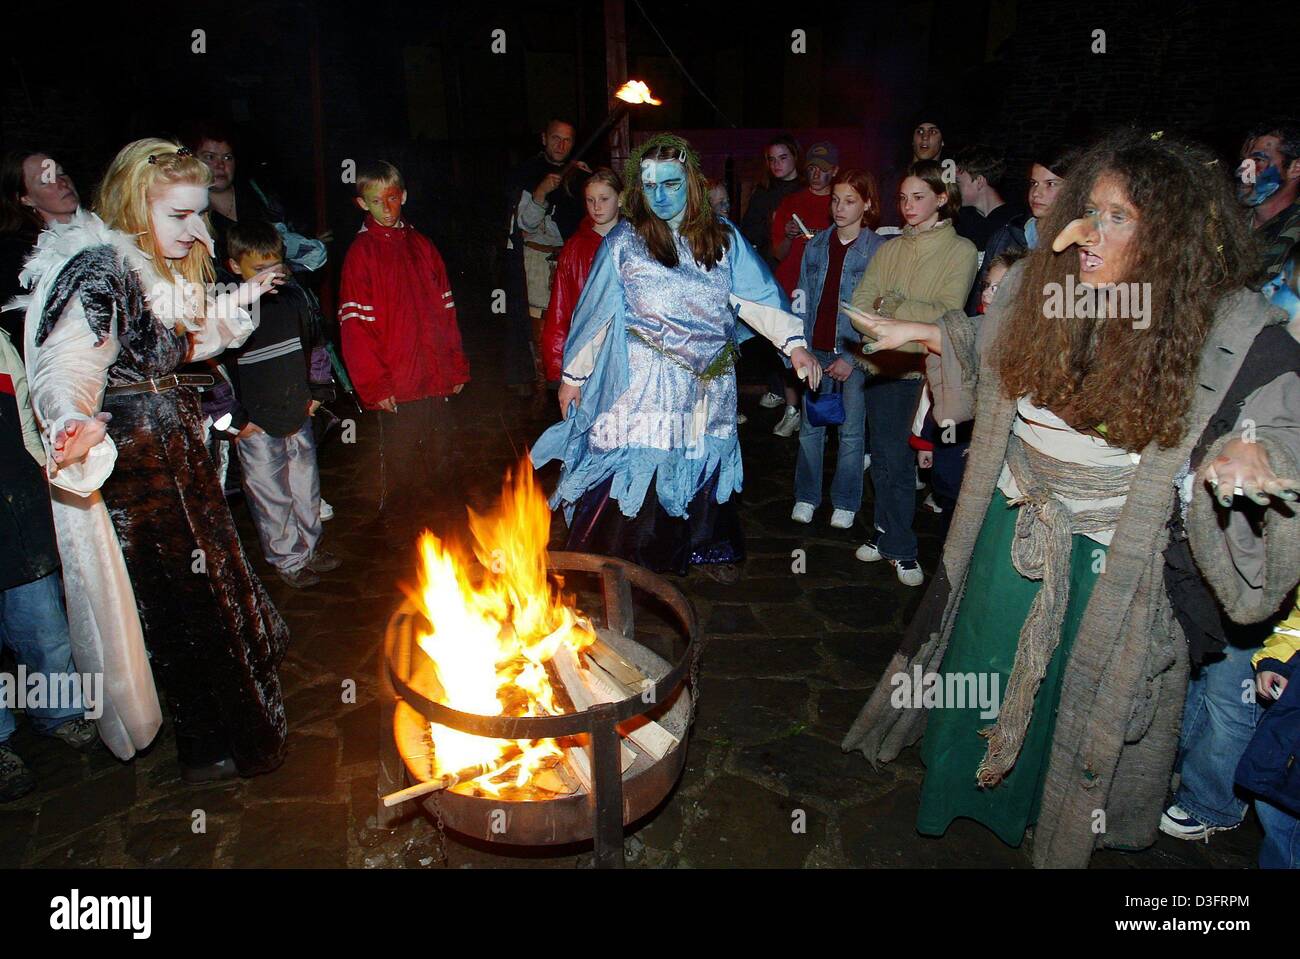 (dpa) - Women dressed up as witches dance around a fire celebrating Walpurgis Night in Brodenbach, western Germany, 1 May 2003. Walpurgis Night is an old pagan festival, which borrowed its name from Saint Walburga whose feast occurs on May Day. On this night witches are believed to ride on broomsticks and he-goats to places of old pagan sacrifices in the Harz Mountains, especially  Stock Photo